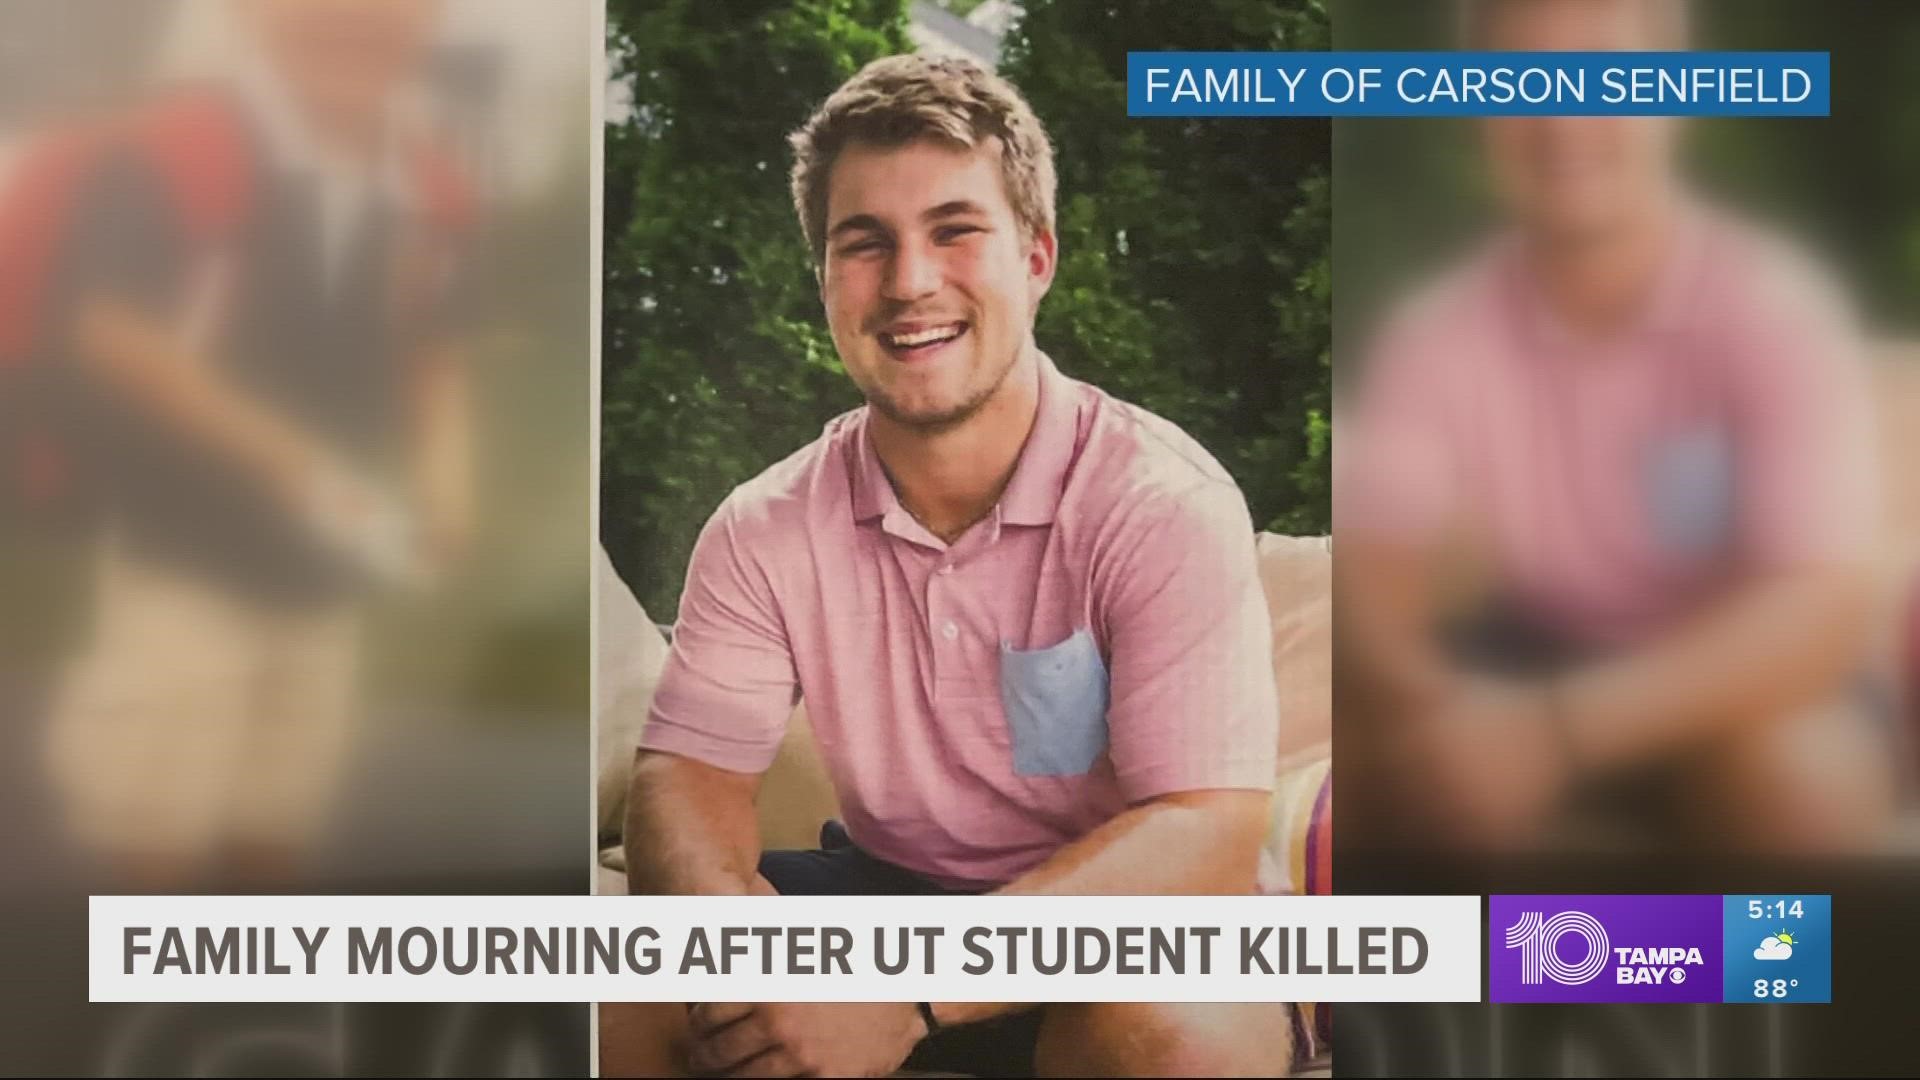 19-year-old Carson Senfield was shot and killed early Saturday morning. The shooter told police he acted in self-defense.